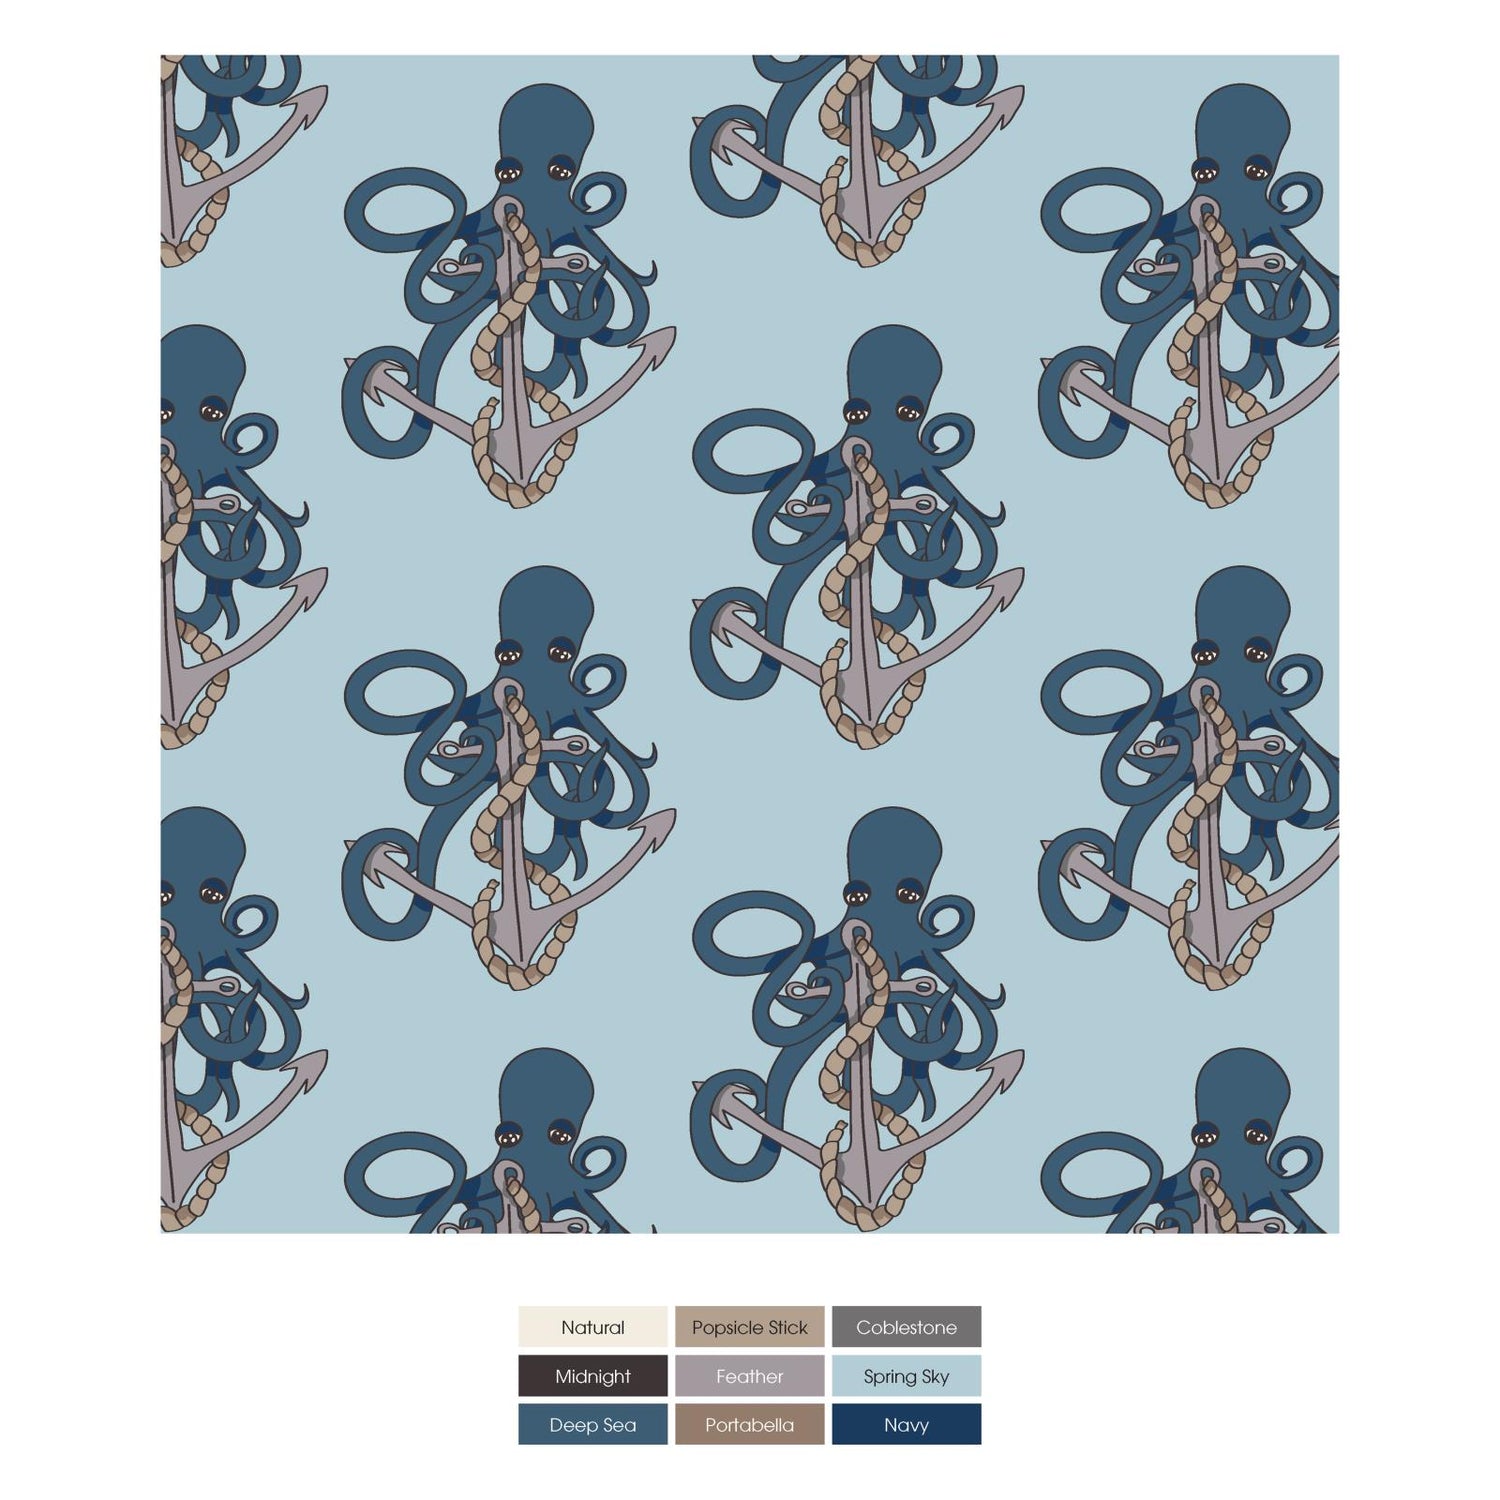 Print Lovey in Spring Sky Octopus Anchor